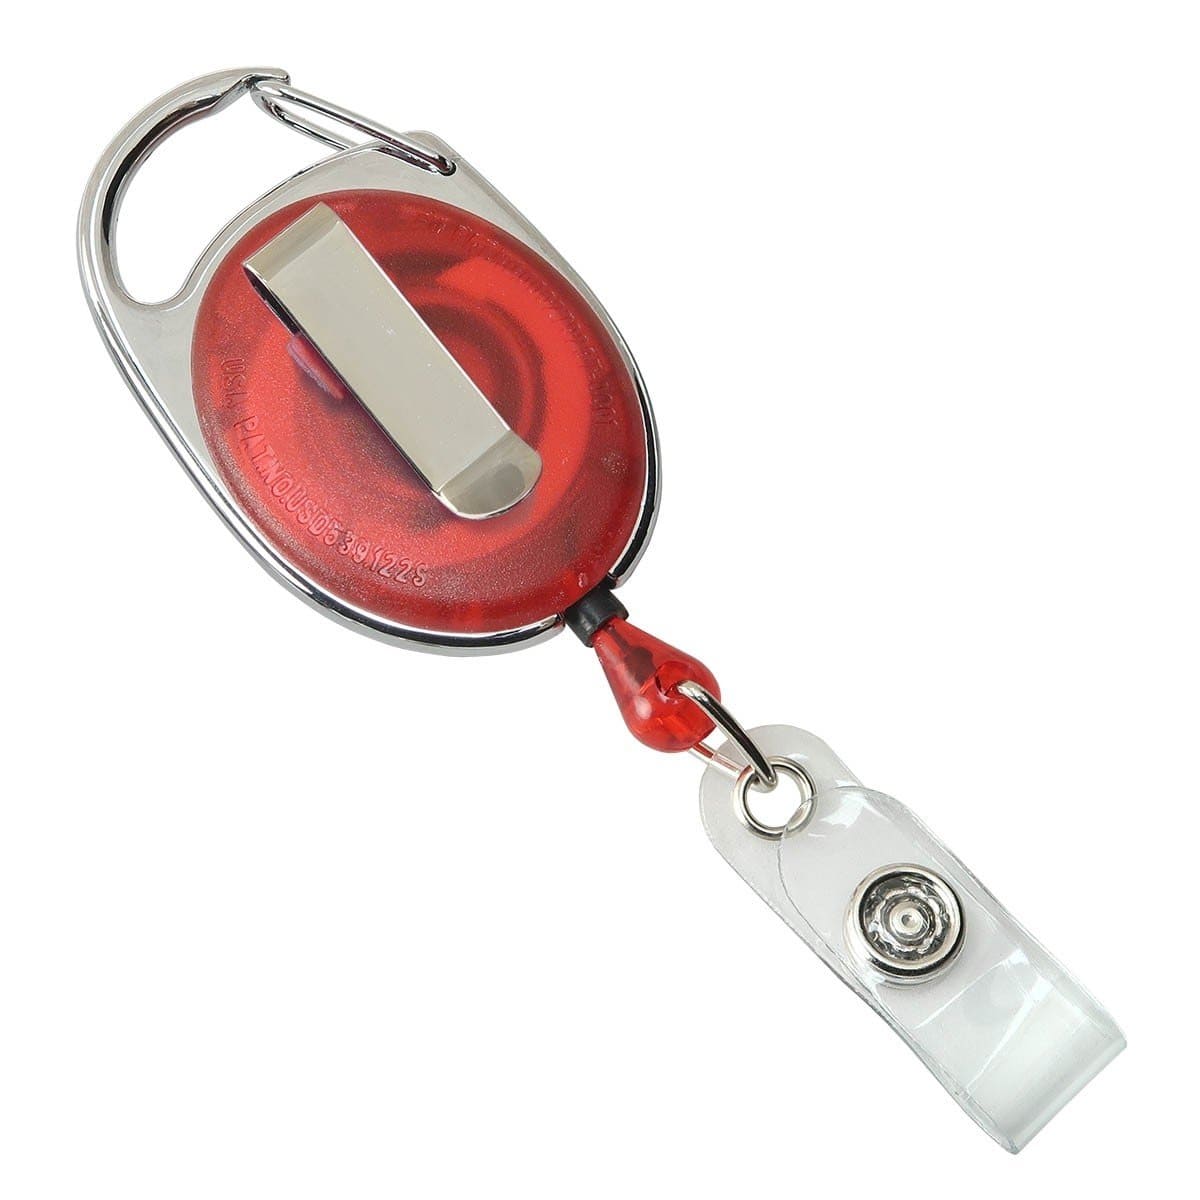 Translucent Red Premium Oval Badge Reel with Carabiner and Belt Clip (2120-71XX) 2120-7156